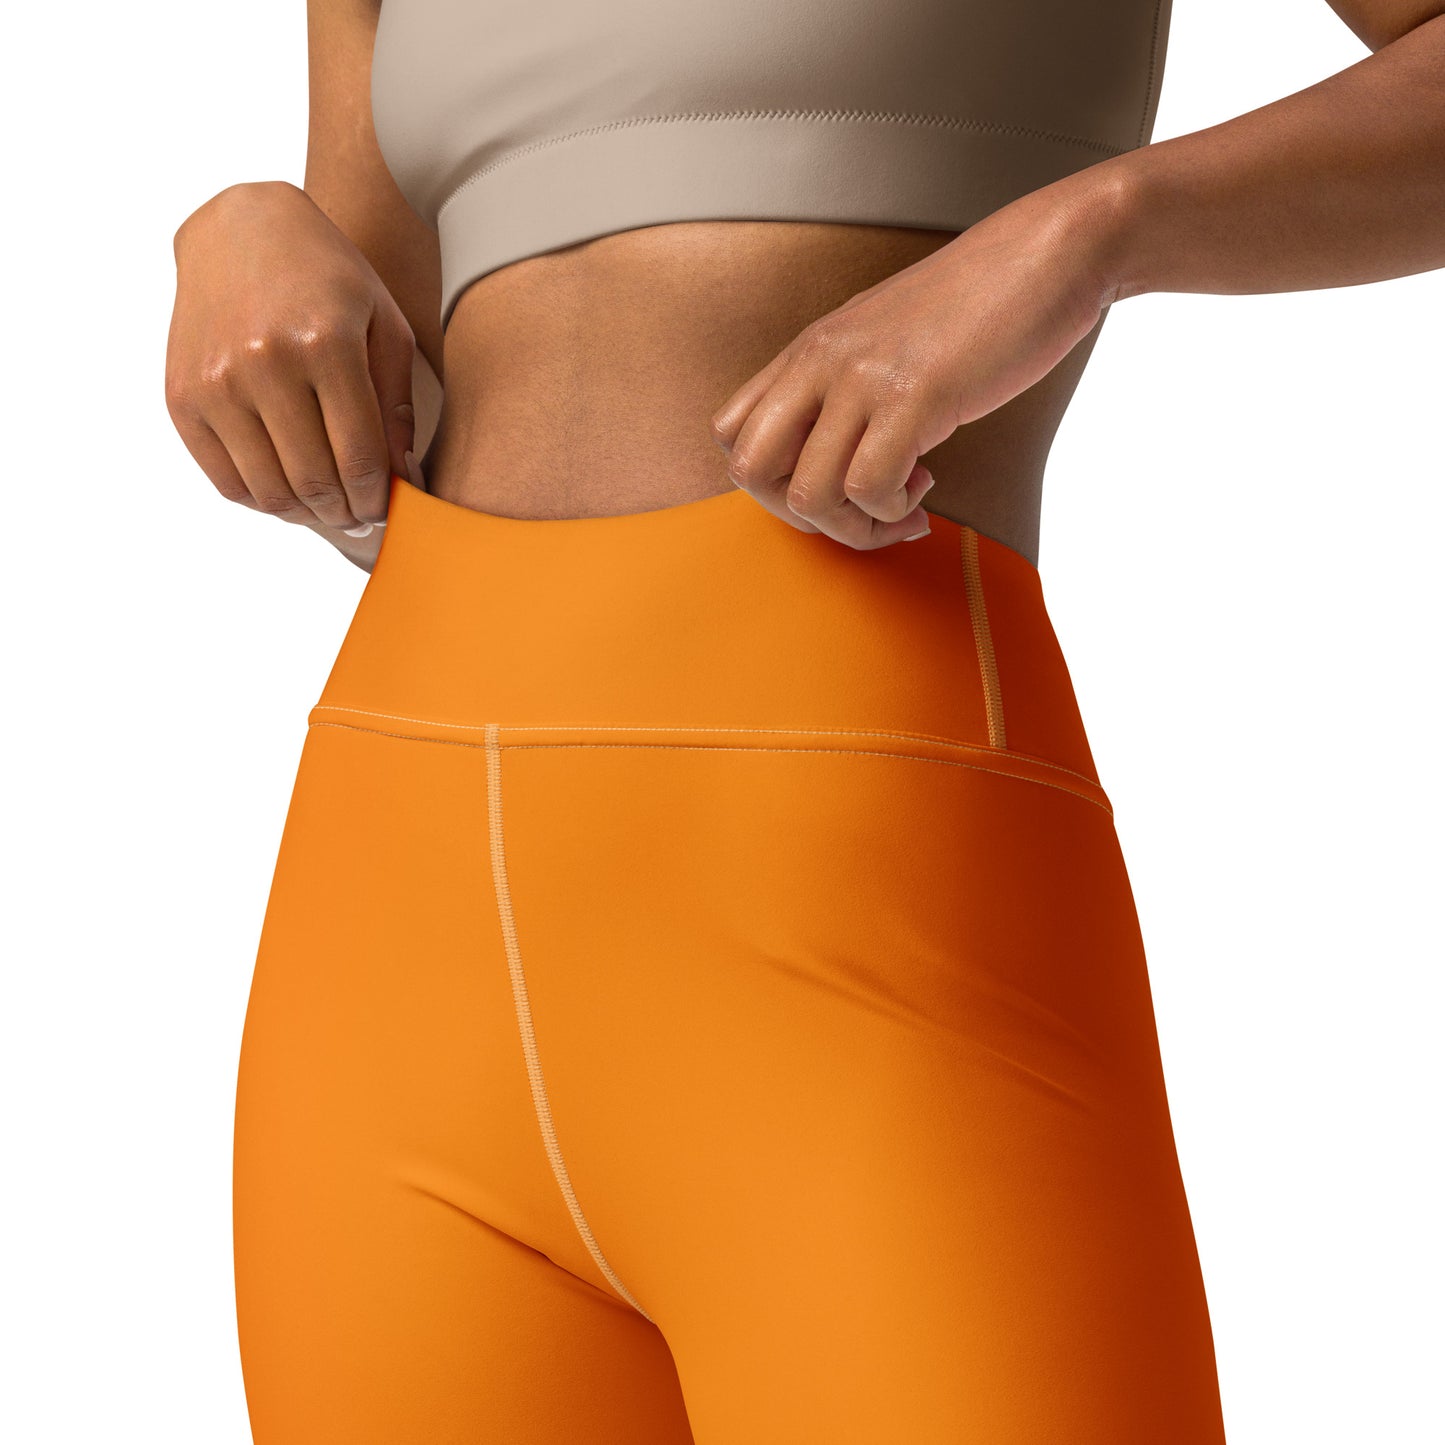 ELEVATED ESSENTIALS, THE PERFECT HIGH WAISTBAND LEGGING TENNESSEE